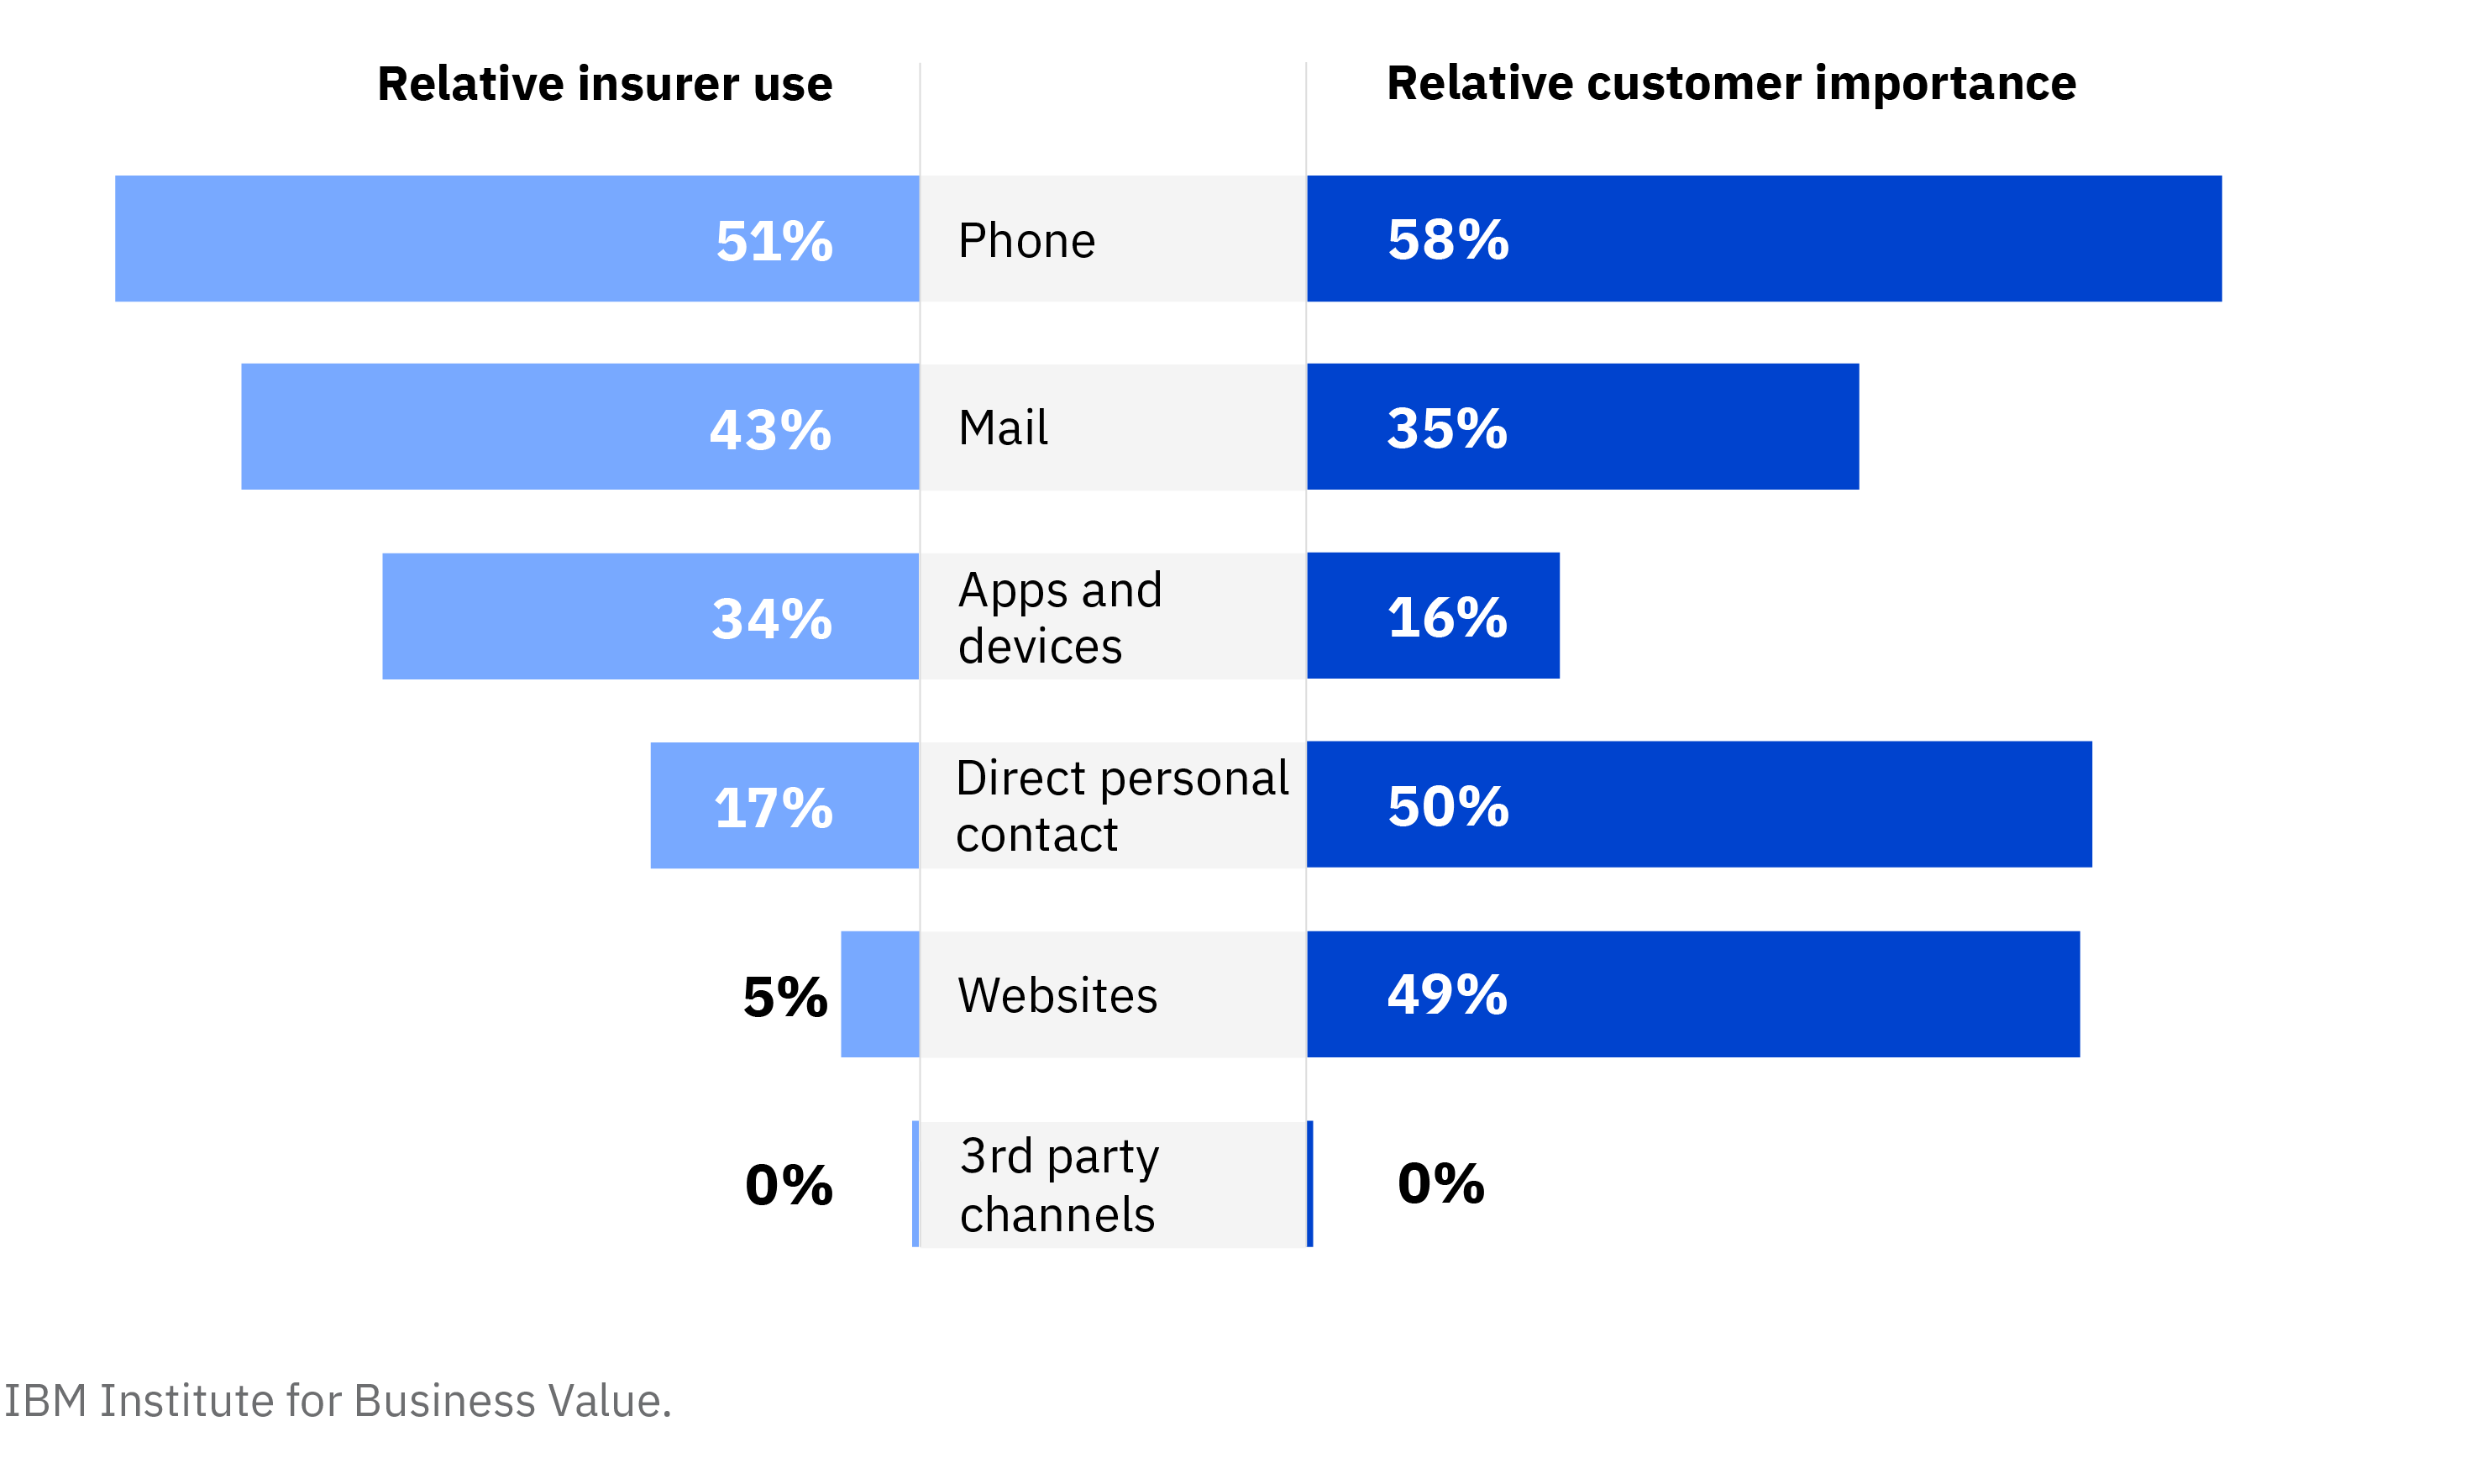 Insurers still rely on old-school communication channels to engage customers